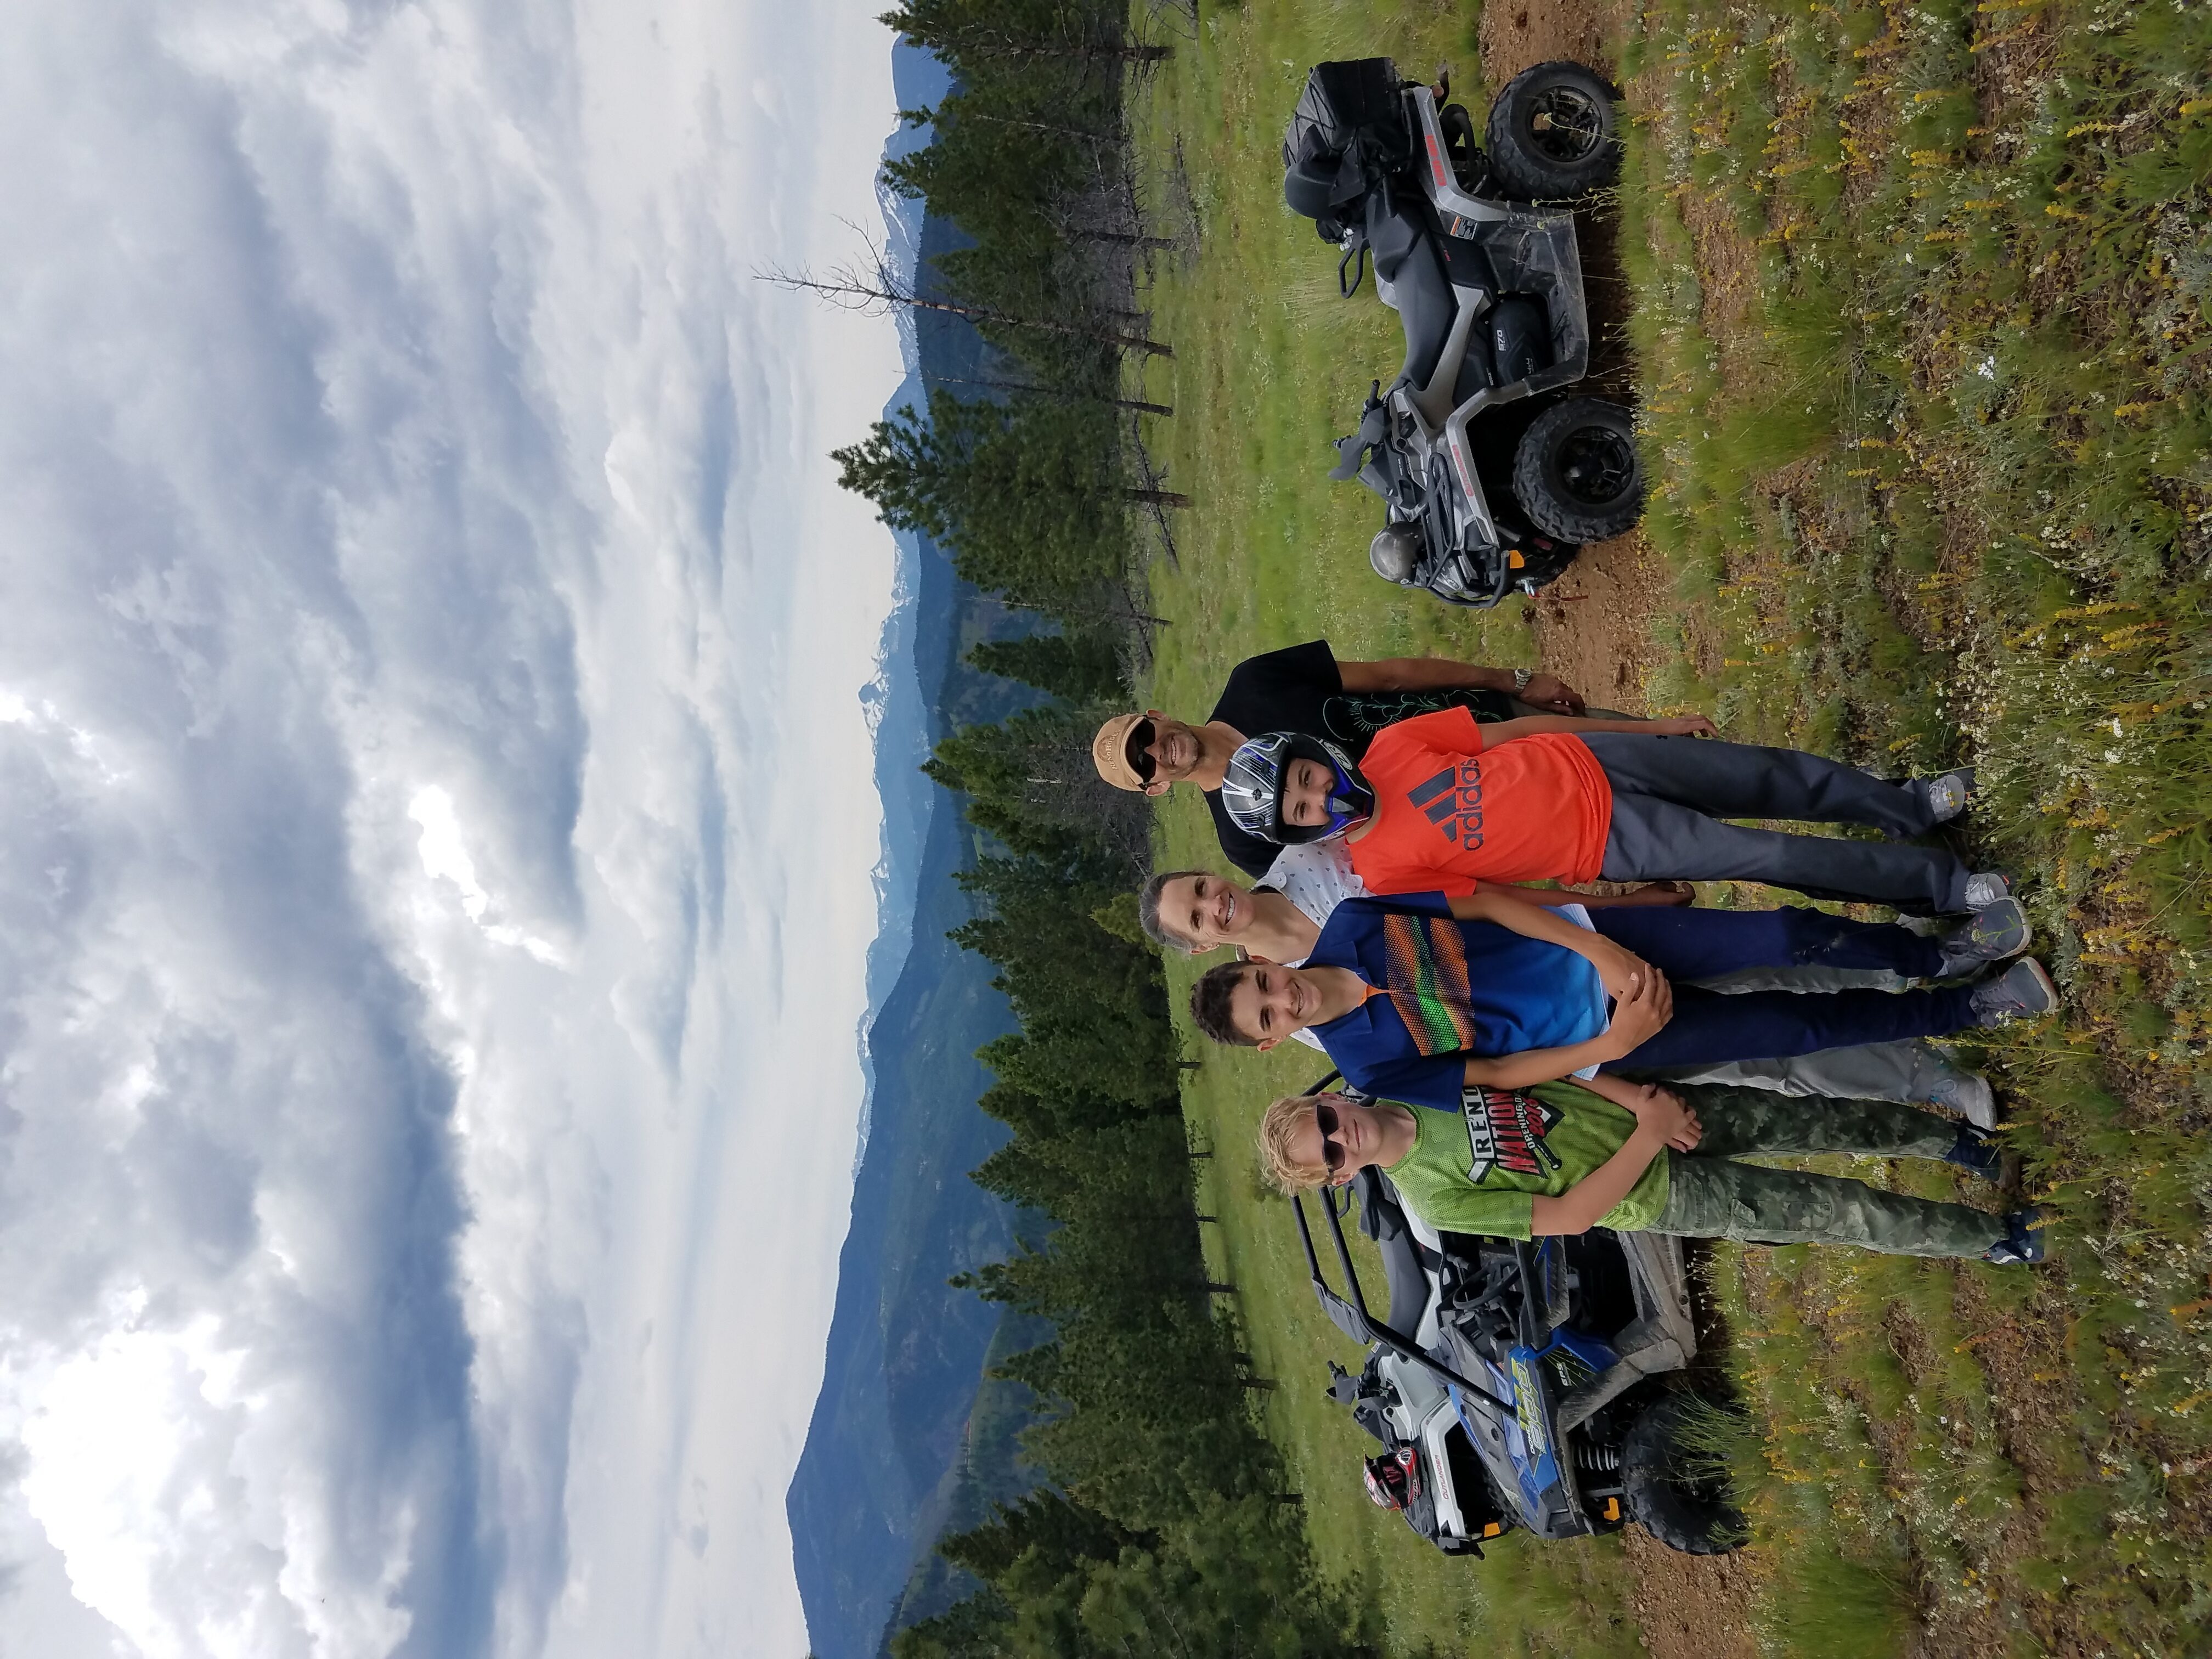 ATV Wilderness Tours along the Lewis and Clark Trail